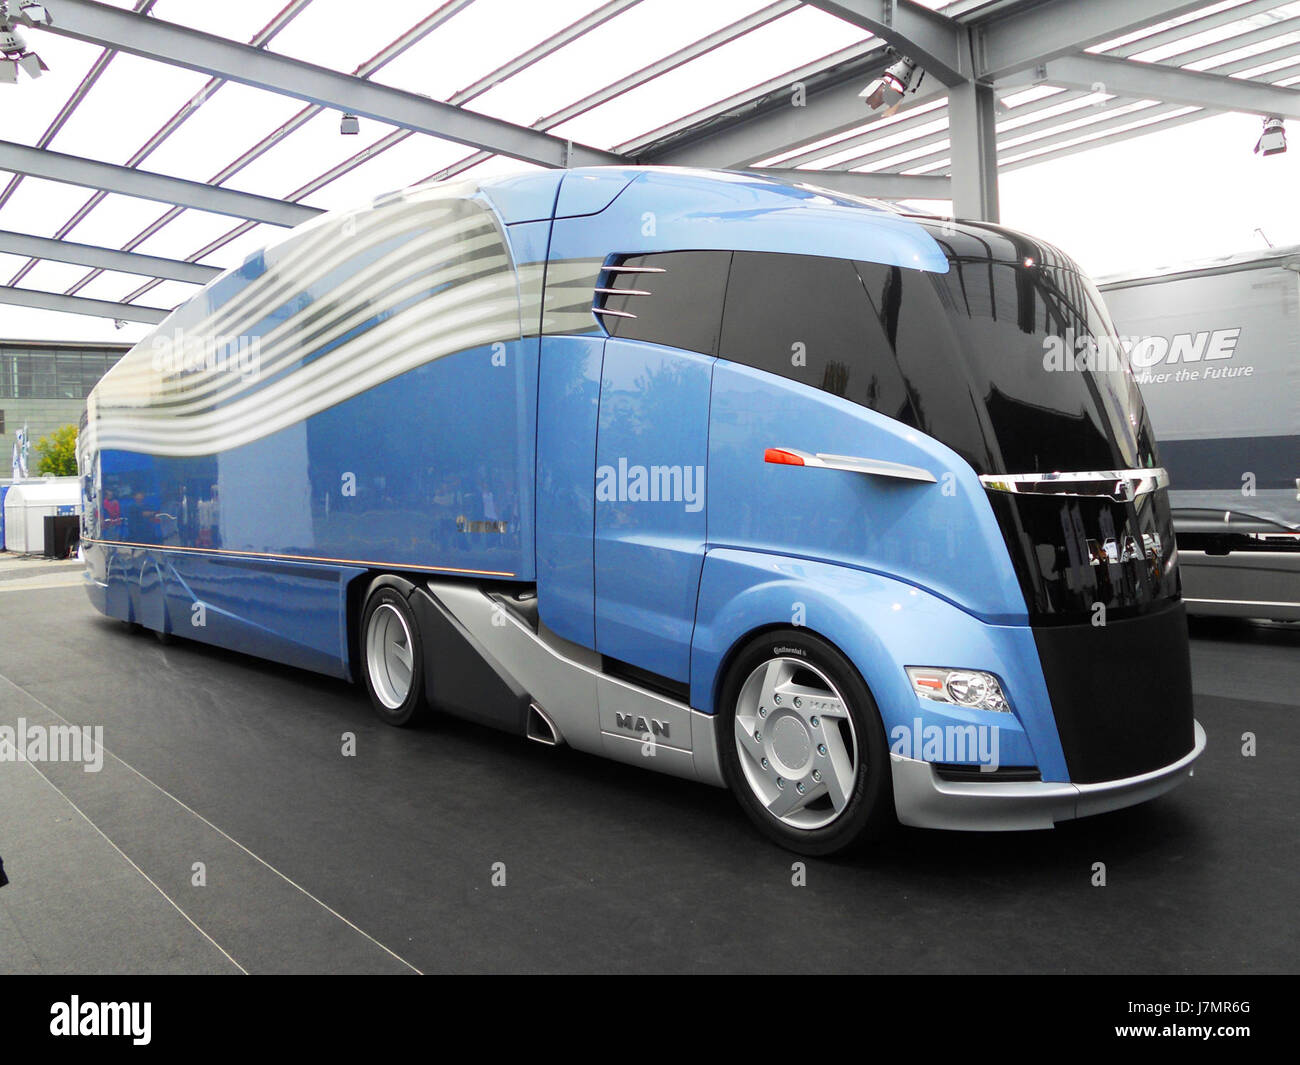 2012 MAN Concept truck with Krone AeroLiner. Facing right. Spielvogel Stock Photo